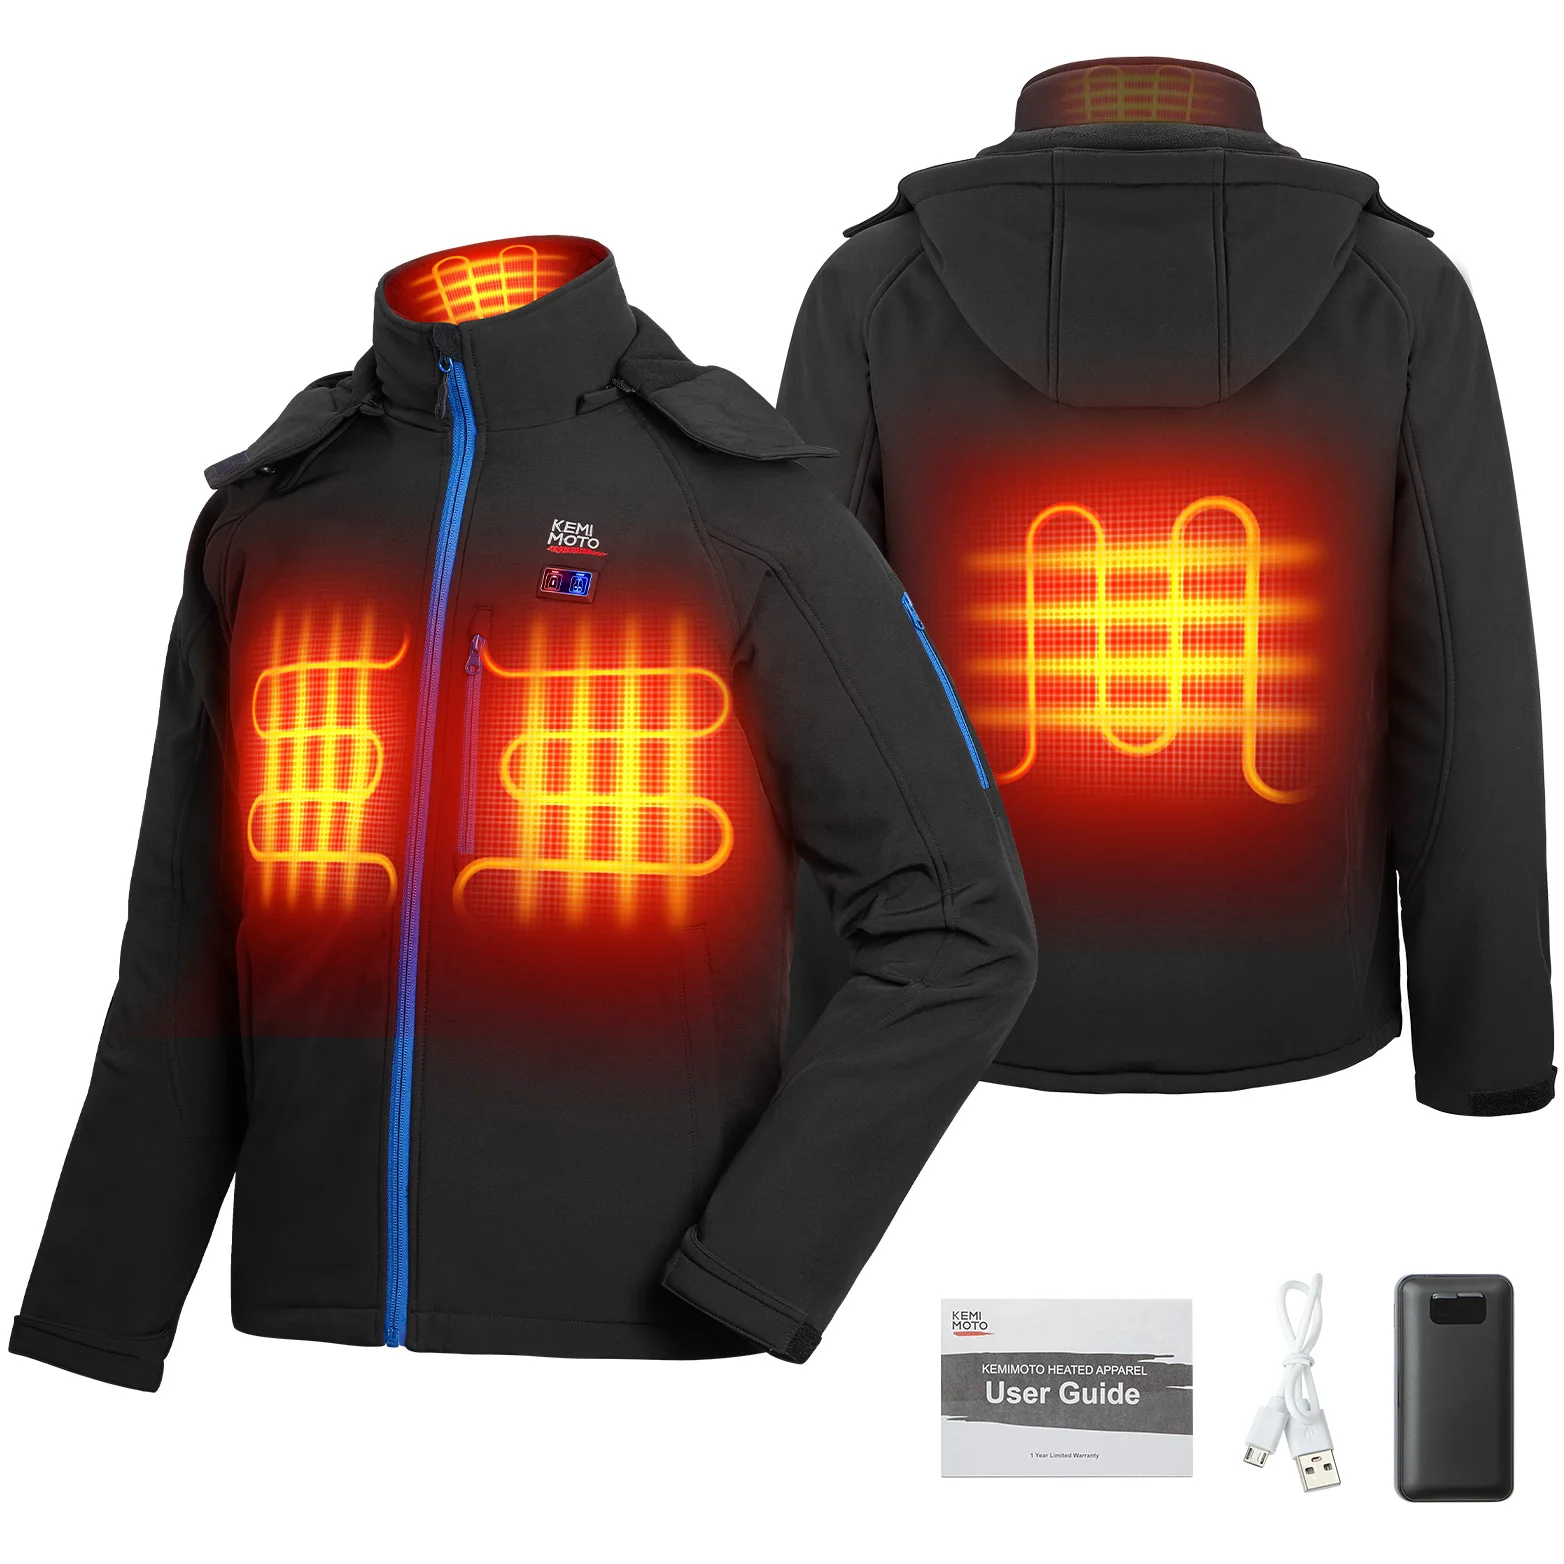 Enlarge Motorcycle Electric Heating Jacket With USB Battery Warm Jacket Winter Thermal Clothes Windproof For Men Women Skiing Hiking